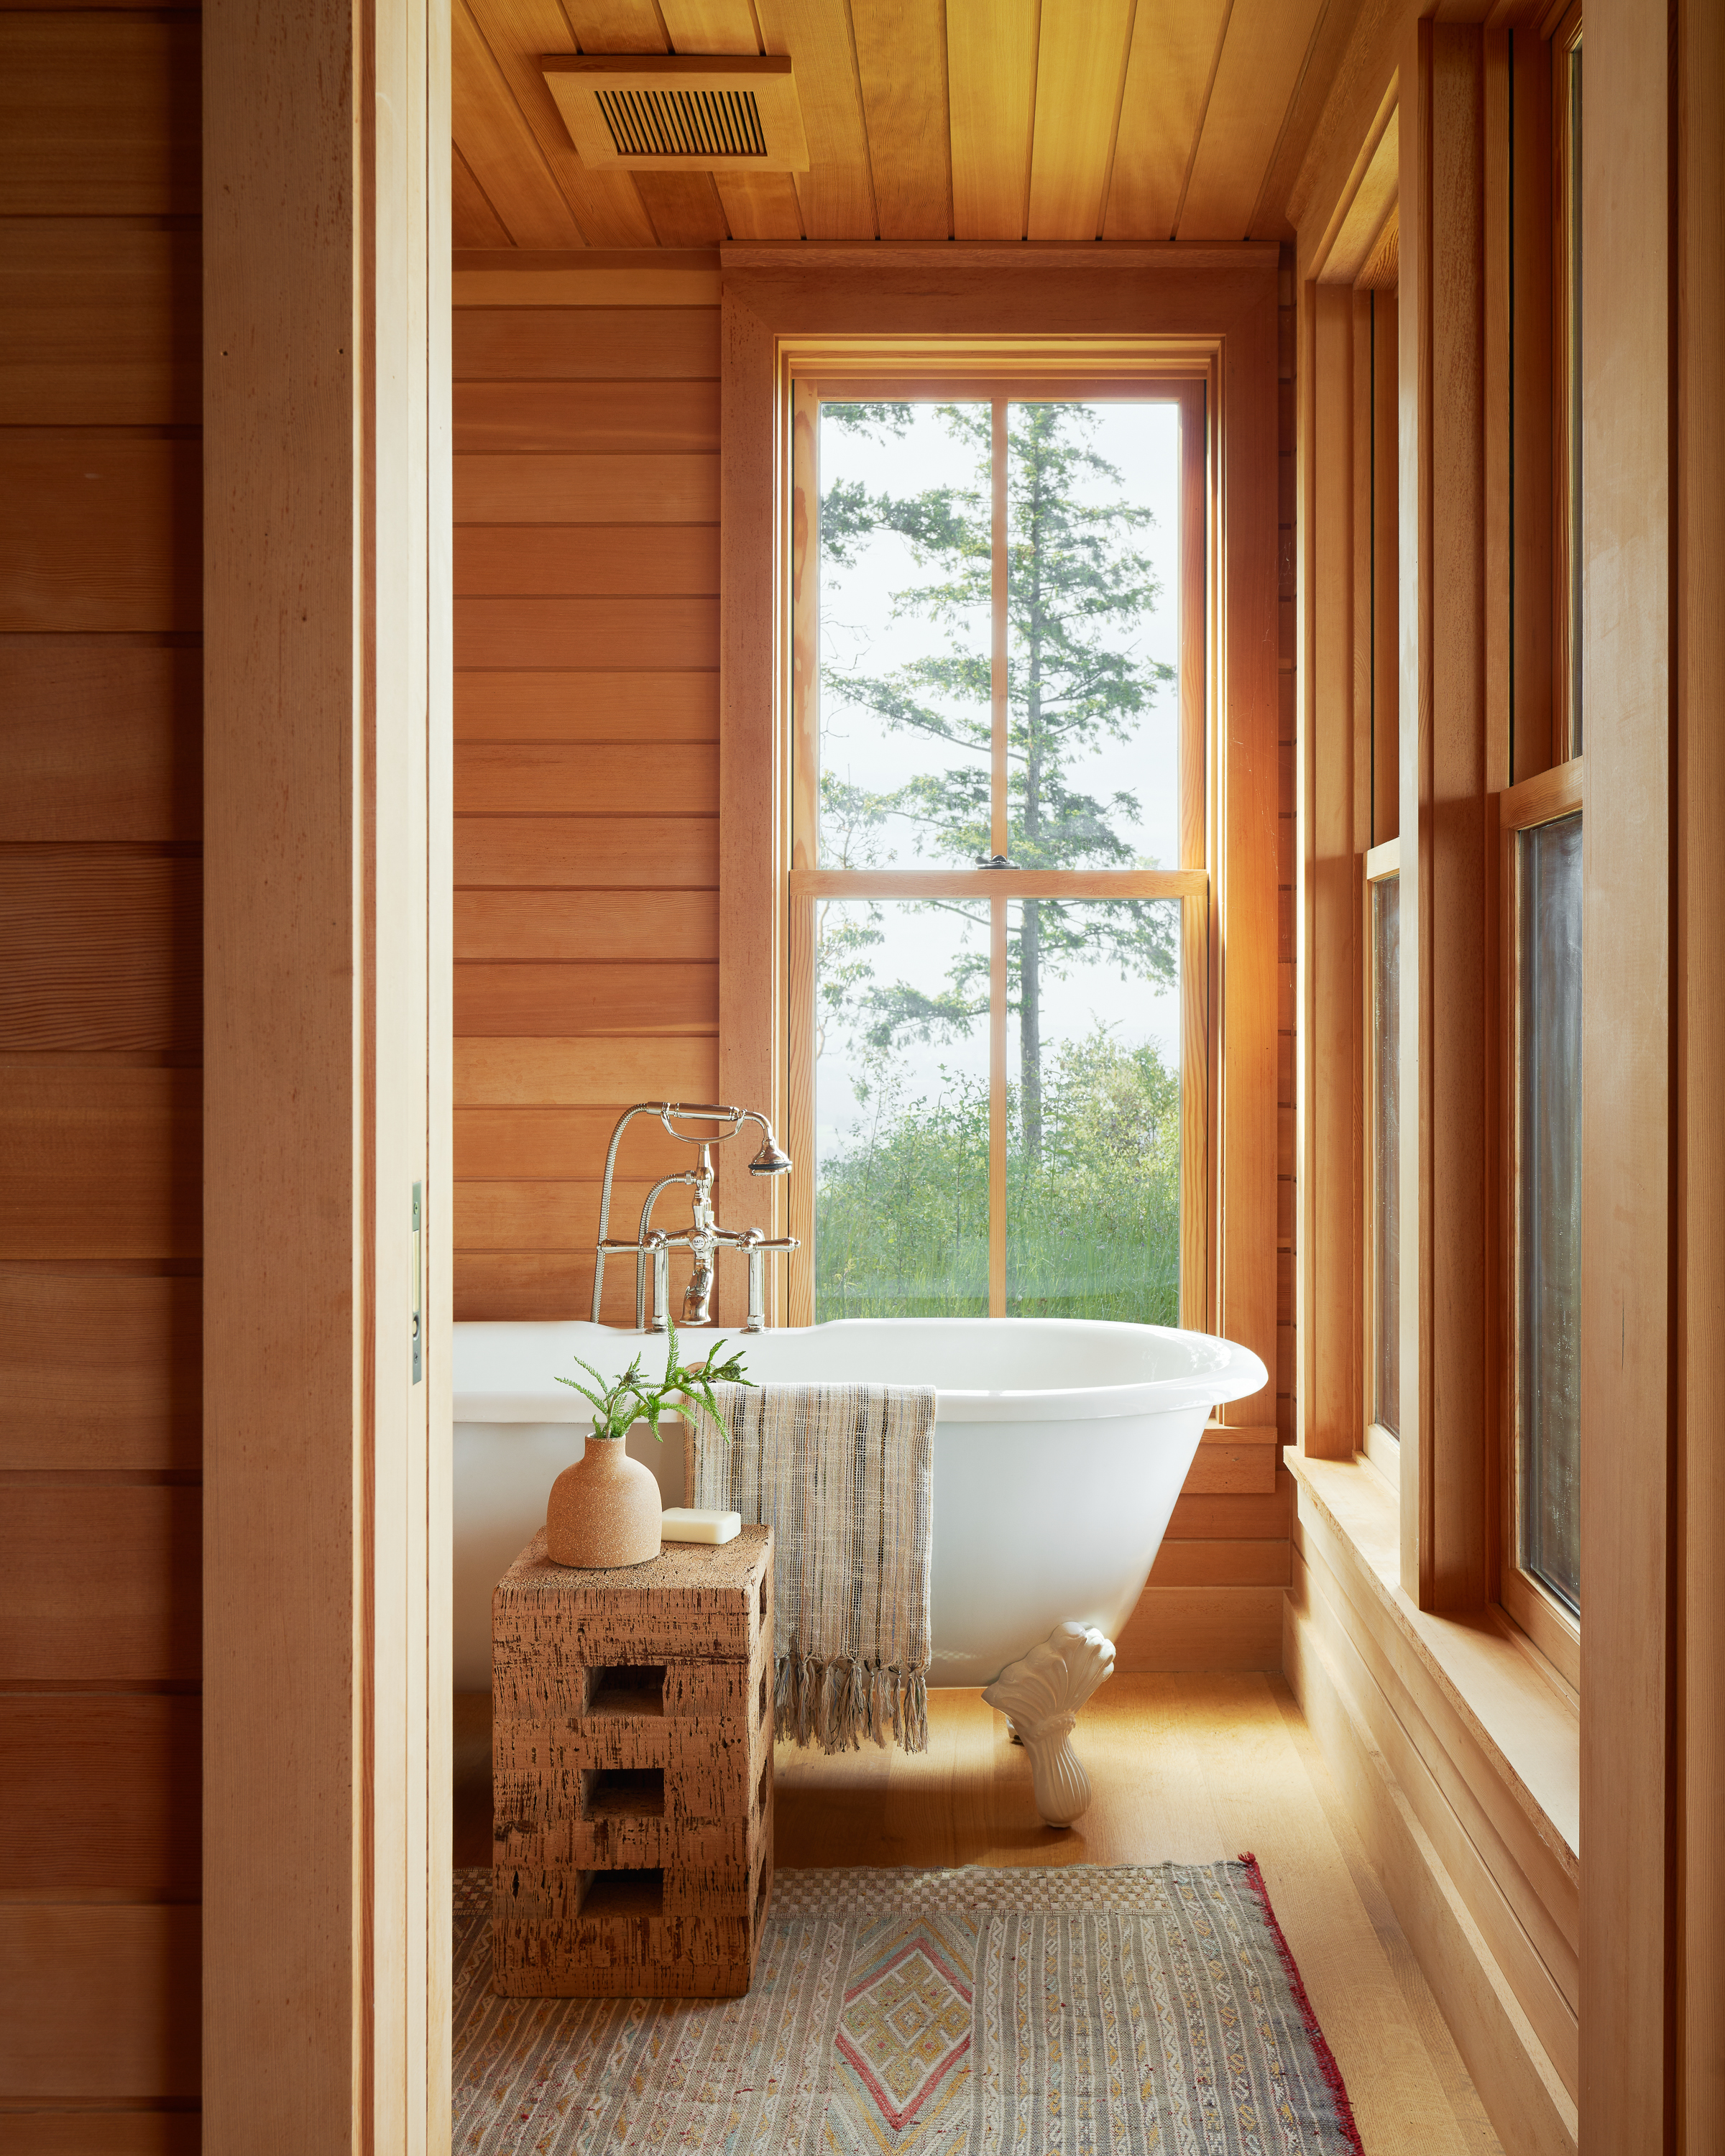 A claw-footed tub with views of the forest.